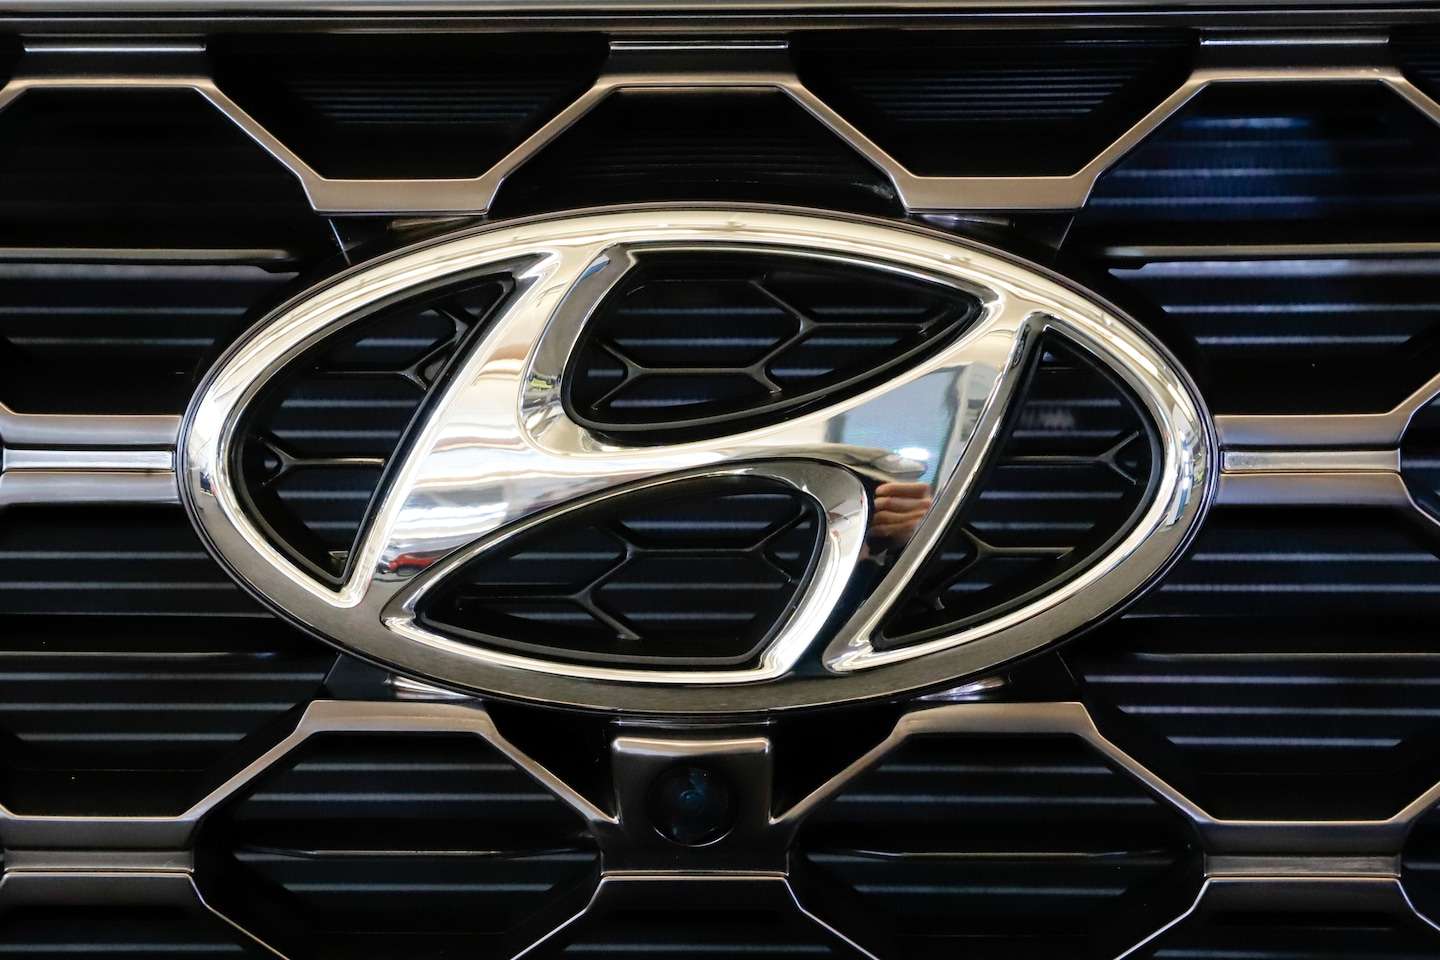 Hyundai recalls 44,000 SUVs, urges owners to park outside over fire risk